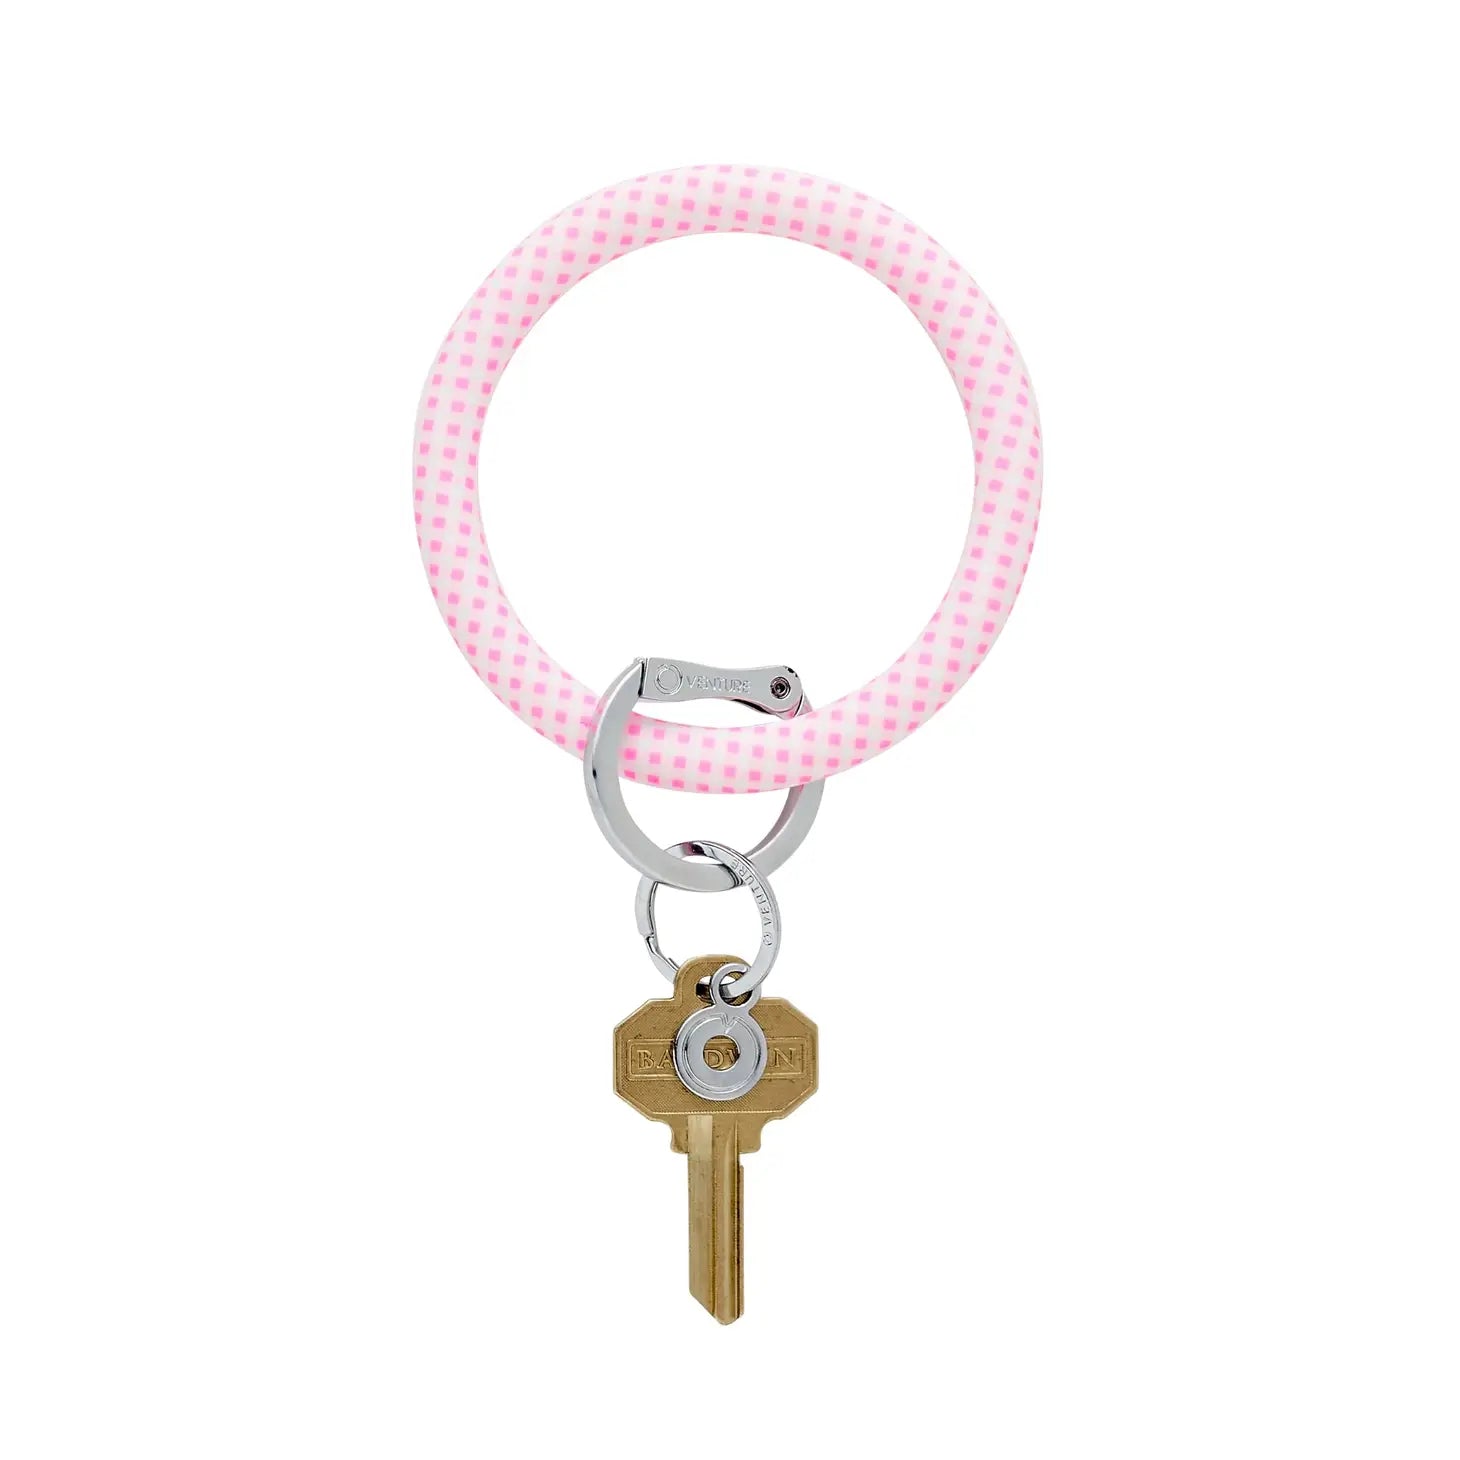 O-Venture Silicone Key Ring - Gingham Tickled Pink